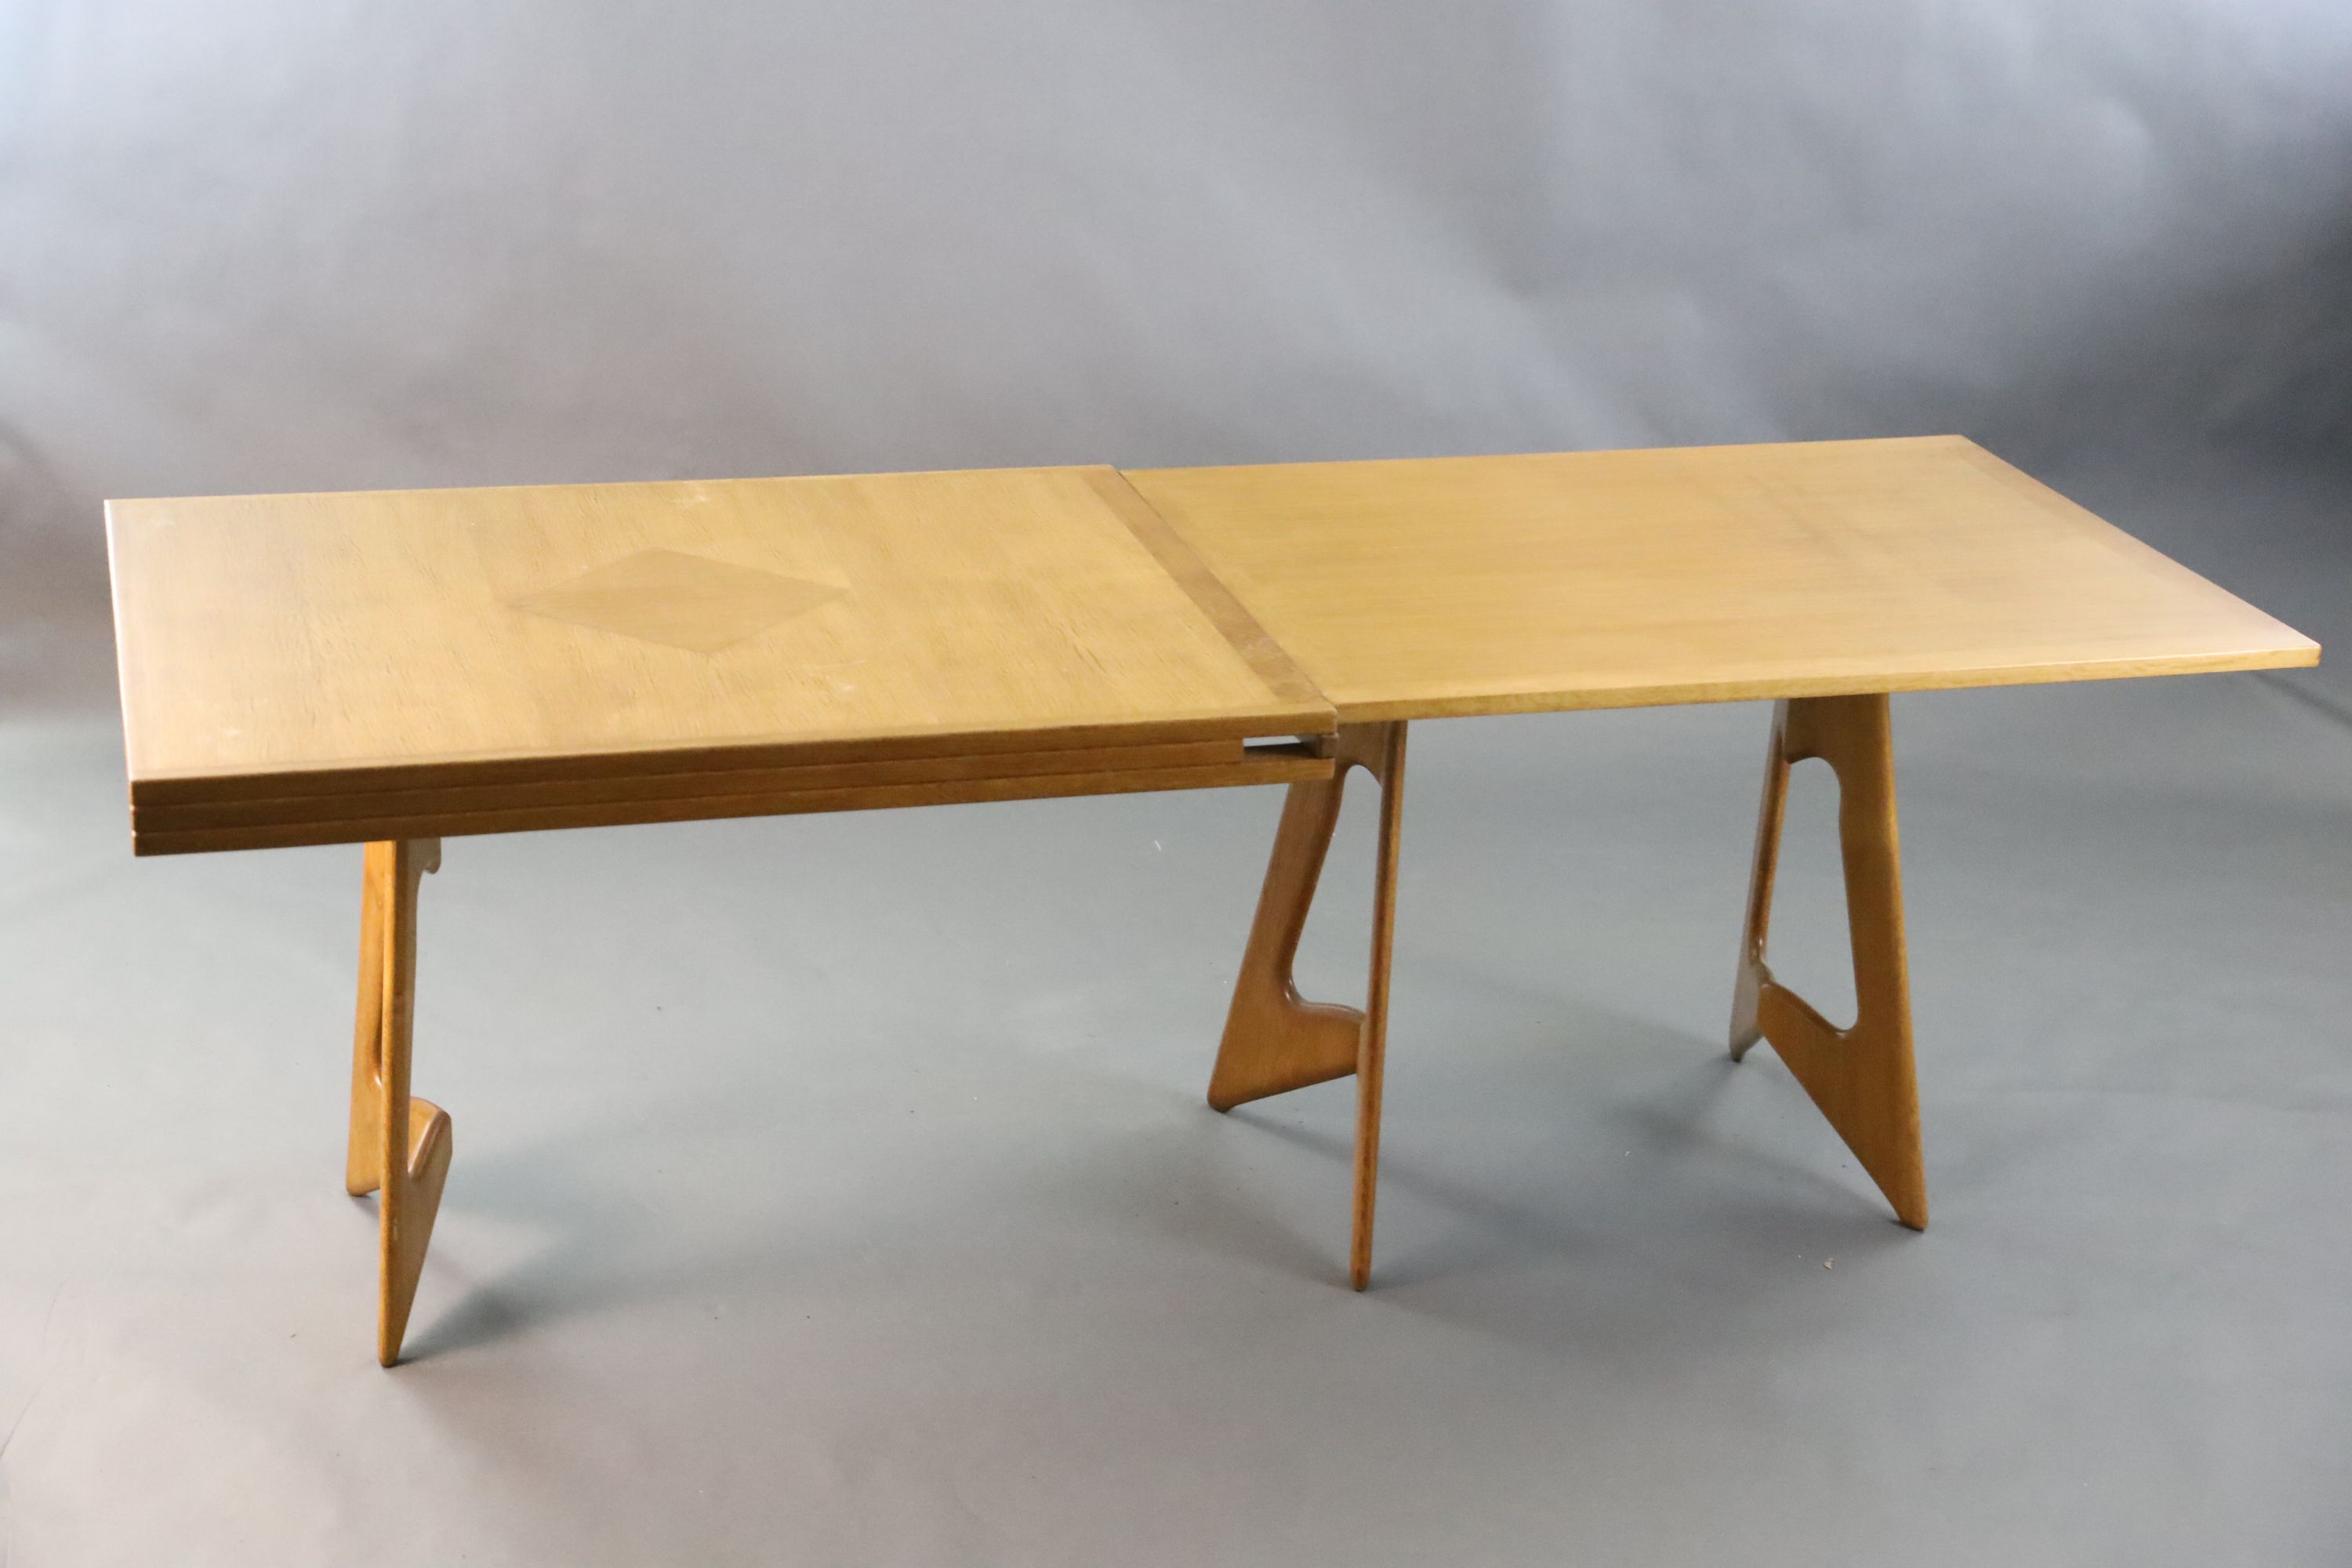 A Guillerme & Chambron golden oak draw leaf dining table, W.3ft 7in. D.2ft 9in. when closed, H.2ft 5in.